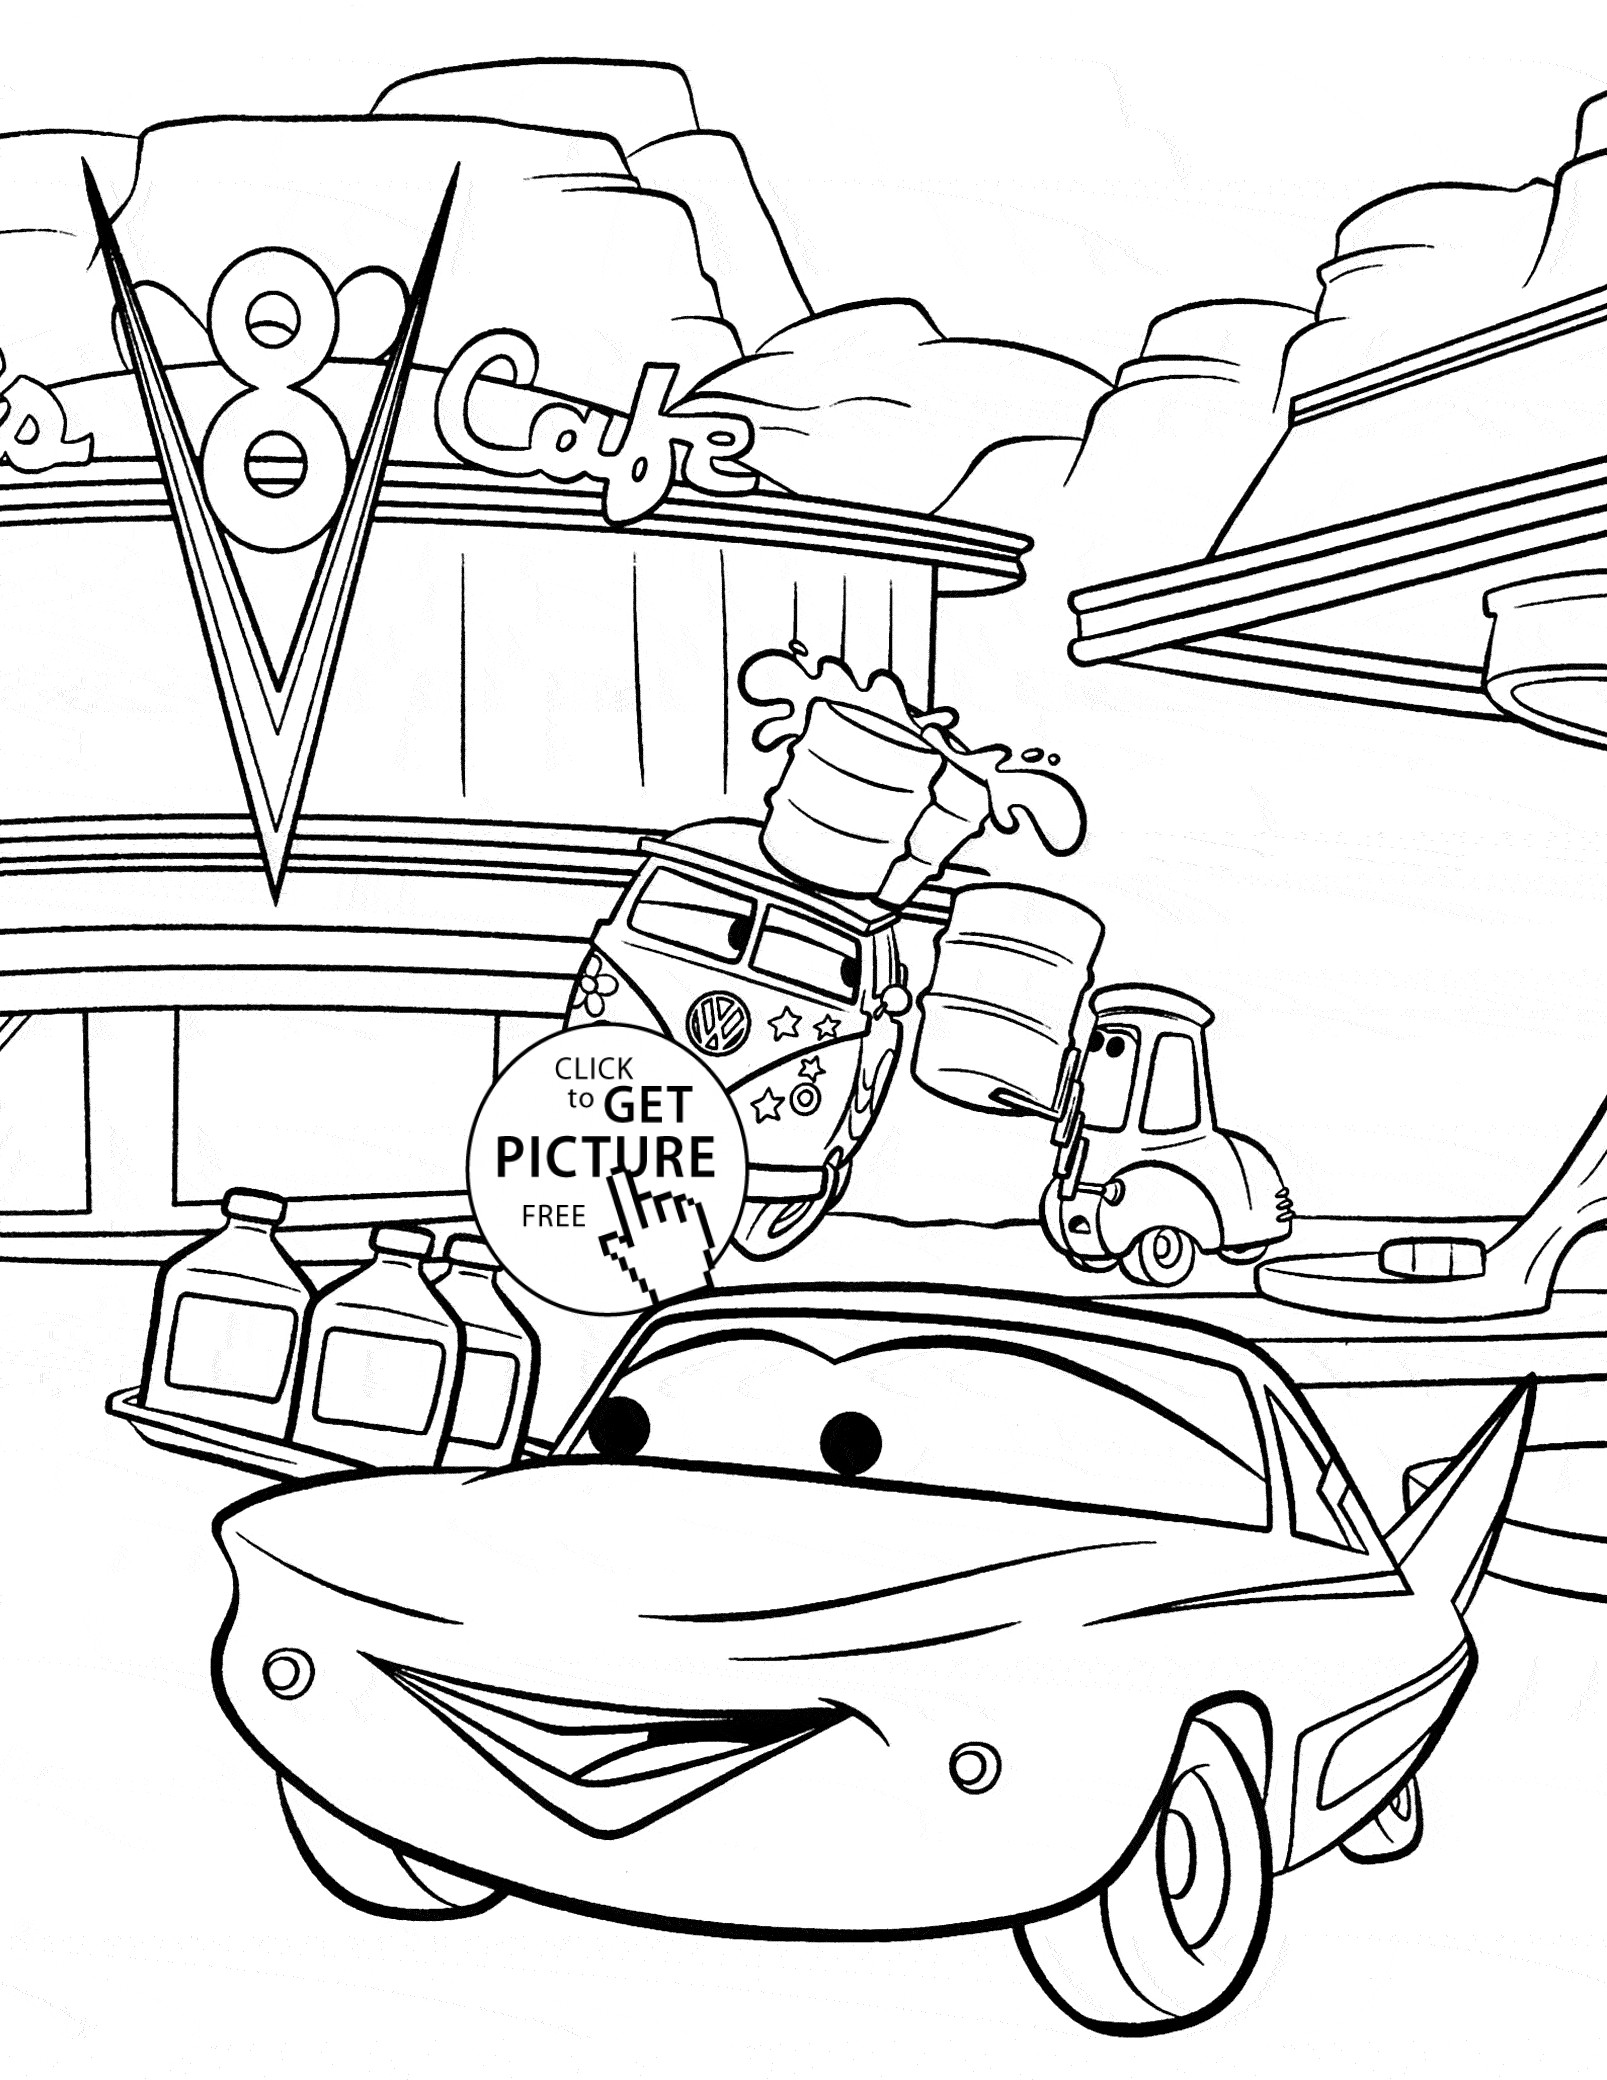 Coloring Pages For Boys Cars
 Cars cafe 8 coloring page for kids disney coloring pages